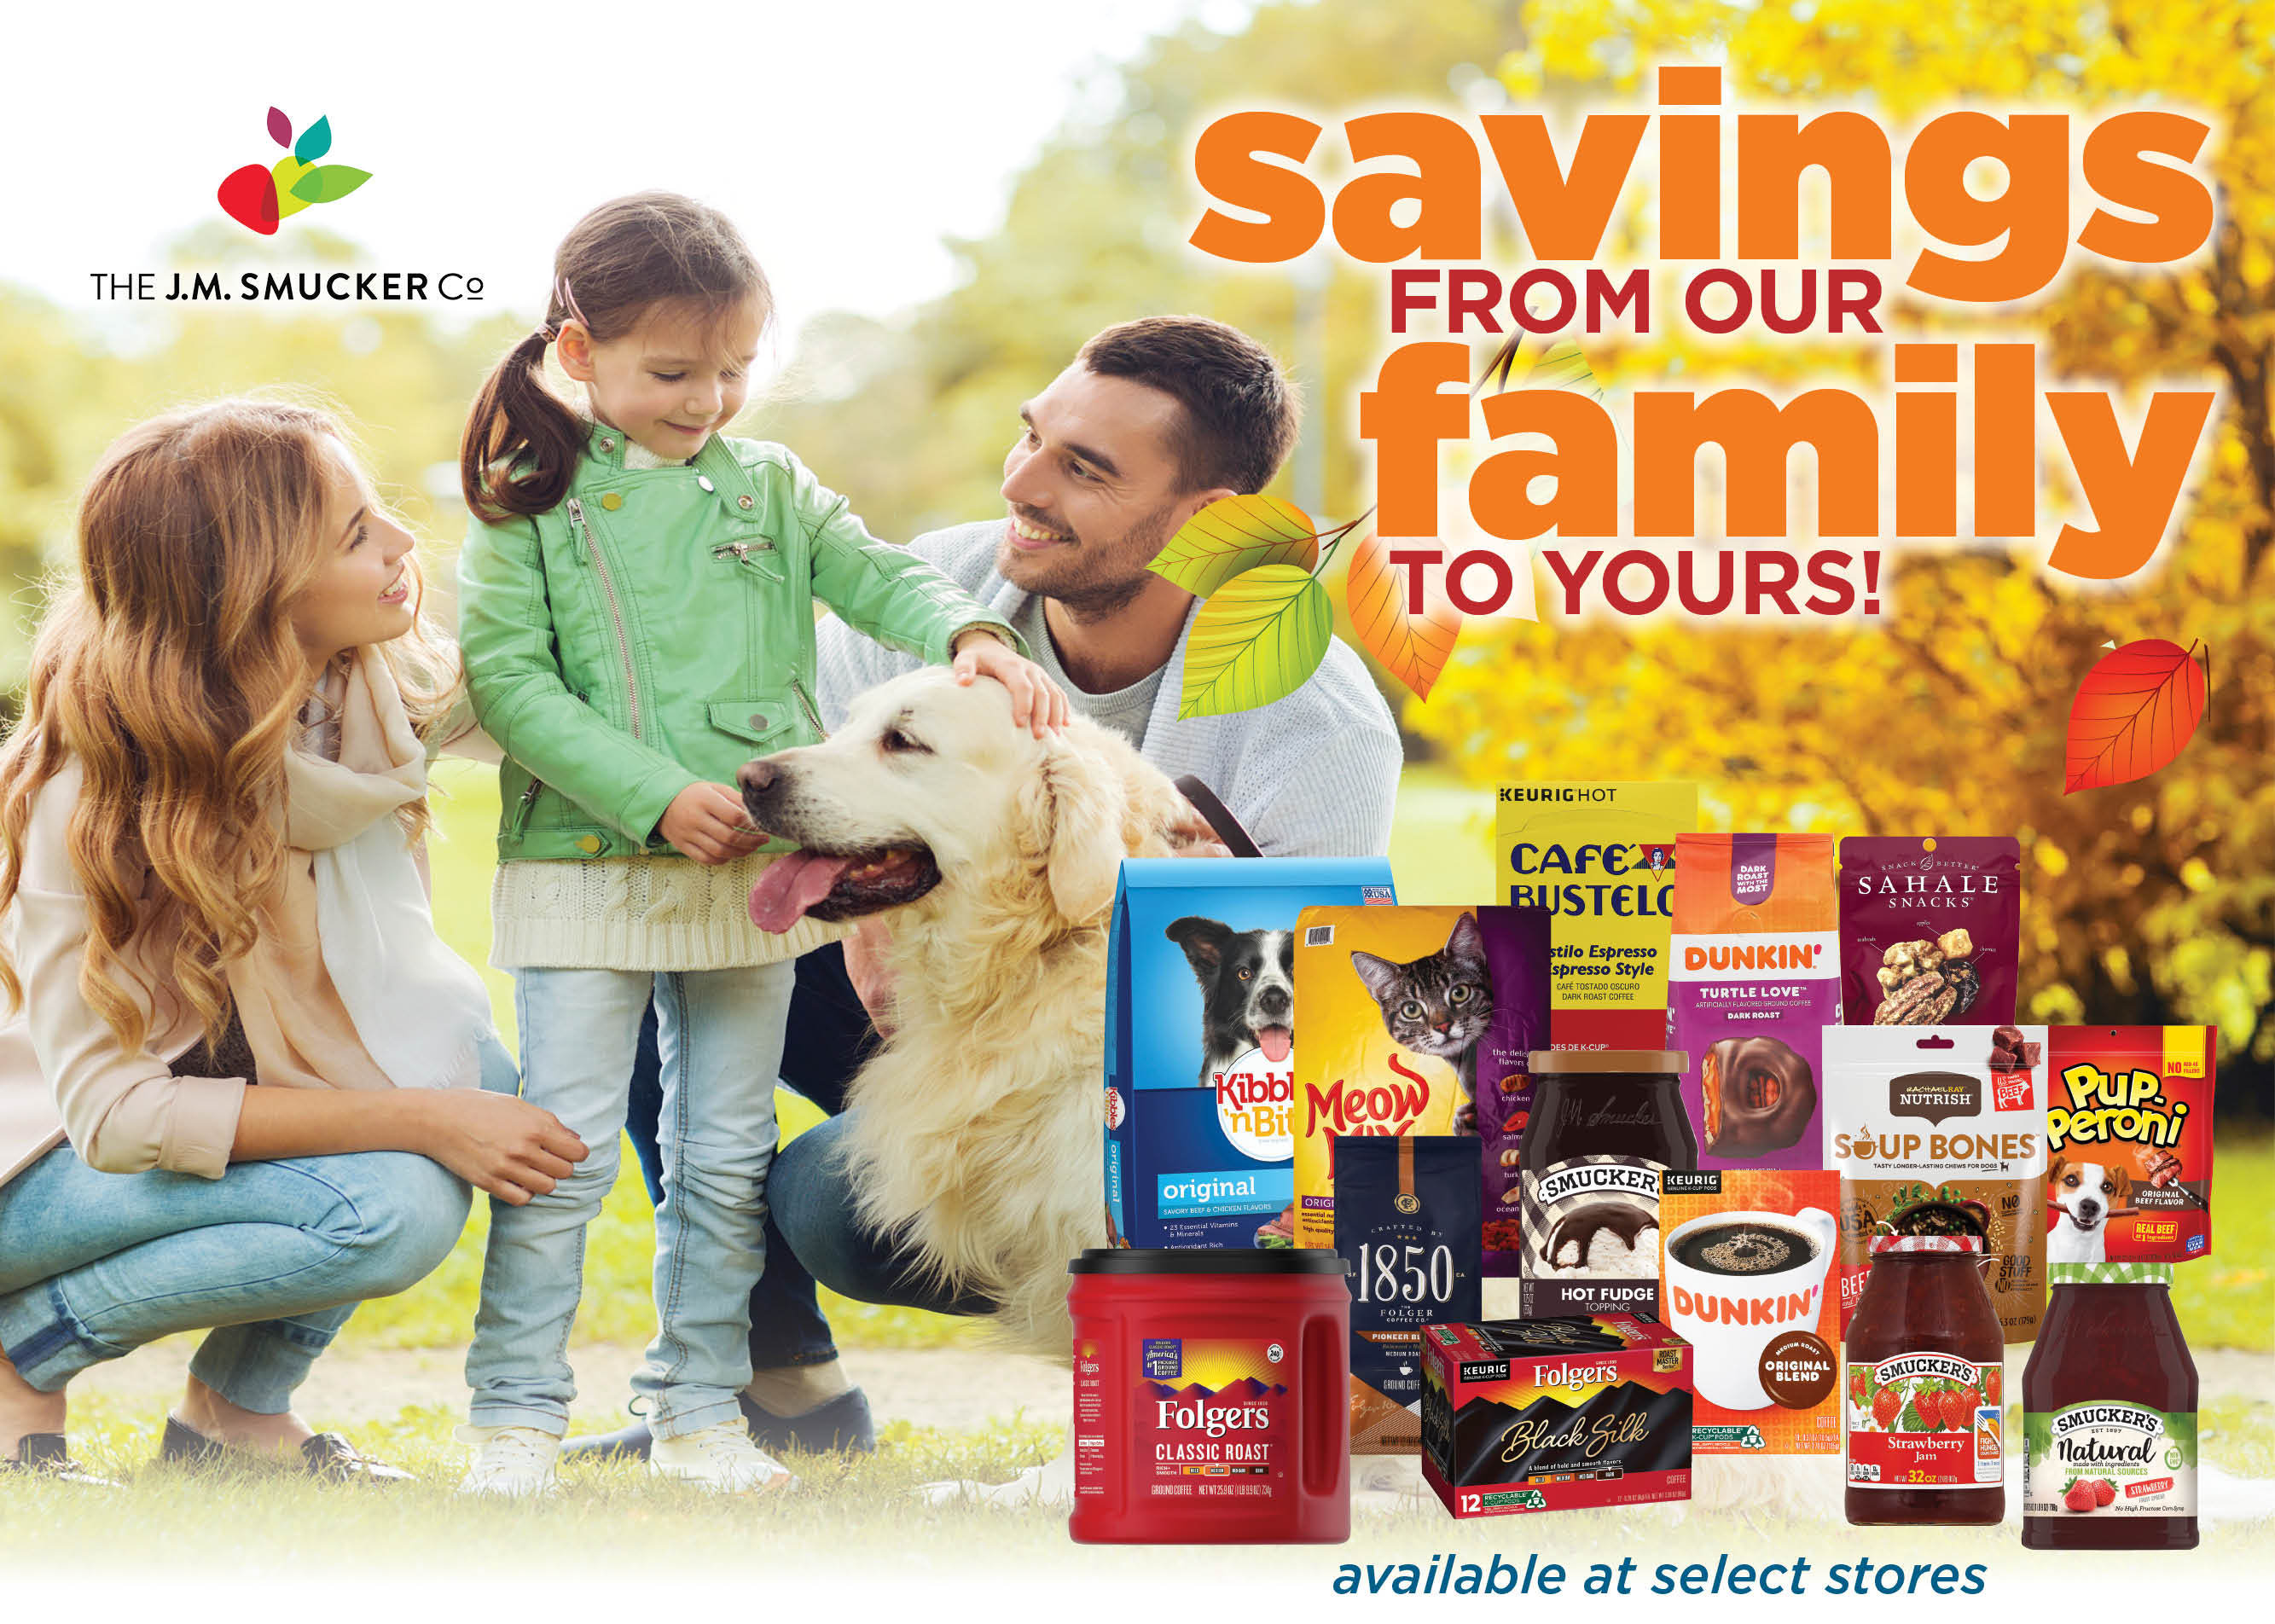 Savings from our family to yours! Smuckers